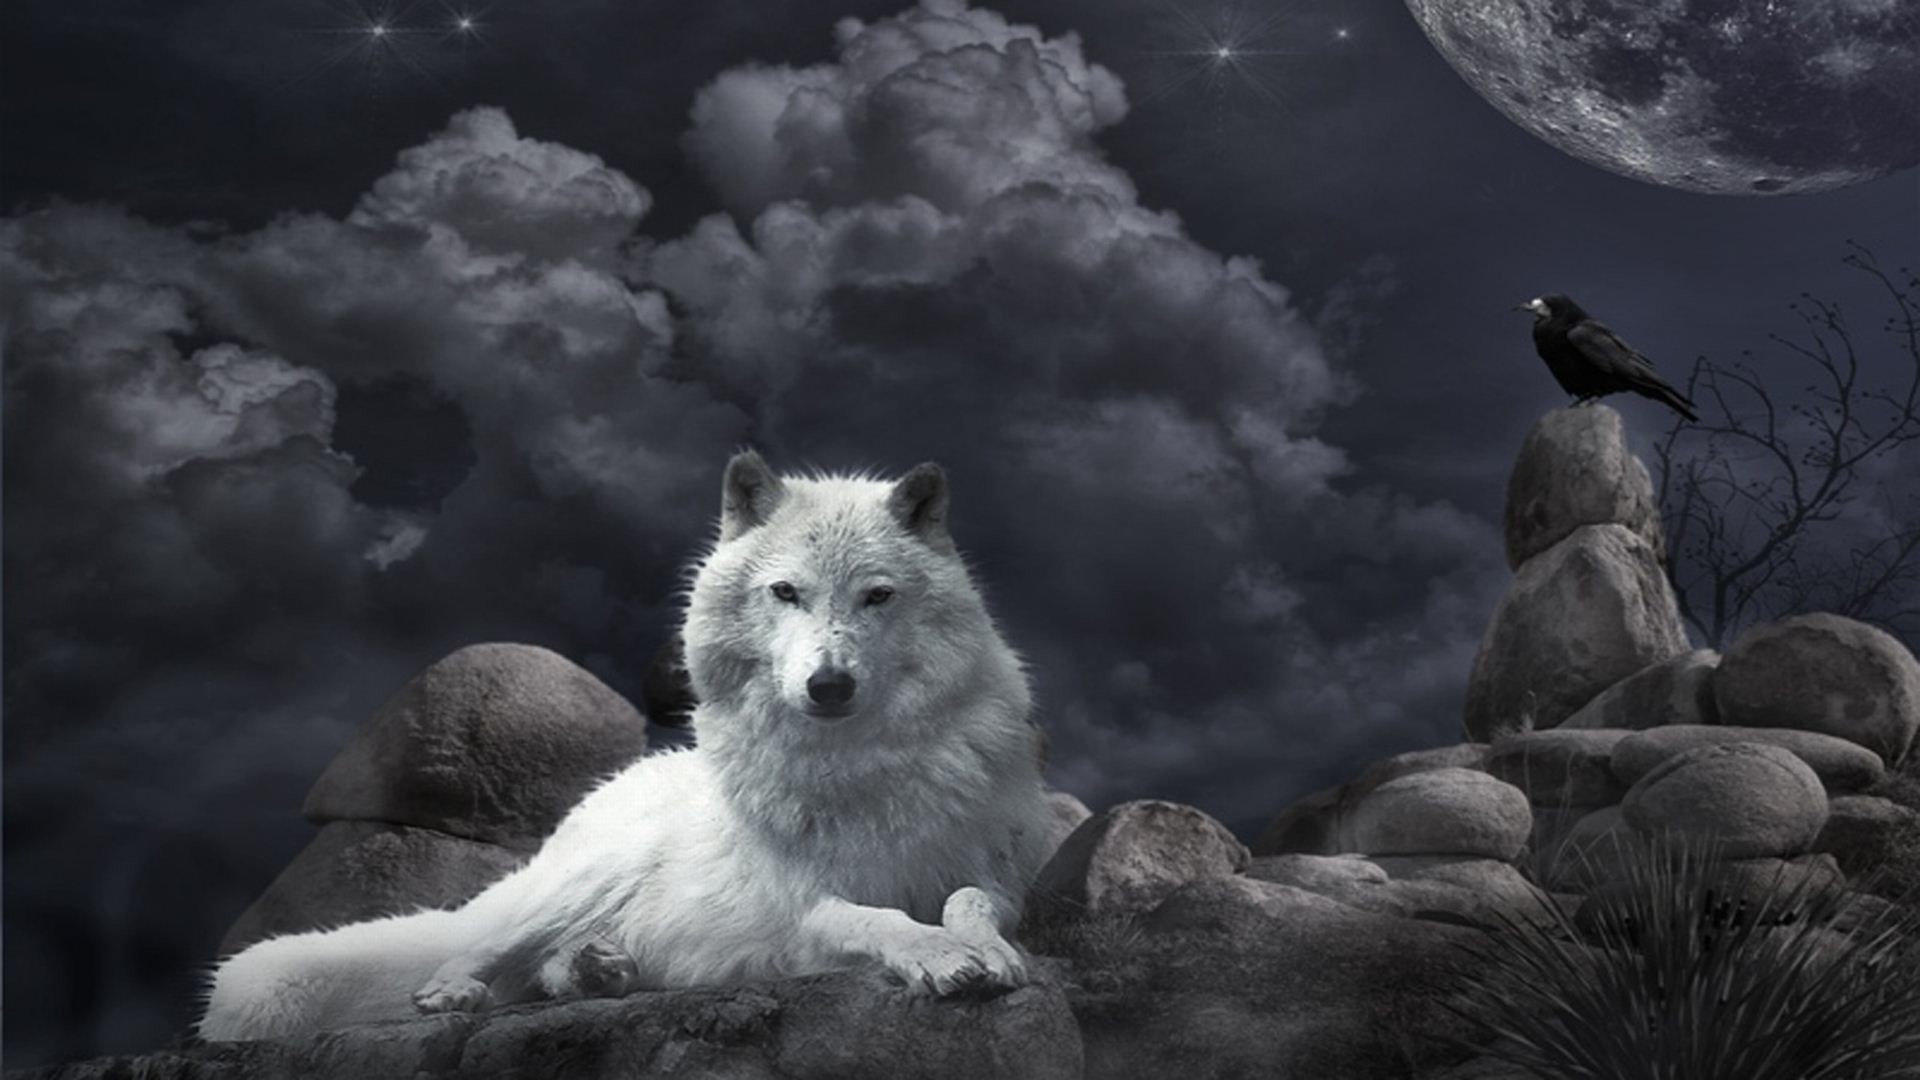 1920x1080 http://www.freehdimages.in/uploads/large/desktop-pics-of-a-baby-wolf- wallpaper.jpg | wolf | Pinterest | Wolf wallpaper, Baby wolves and Wolf